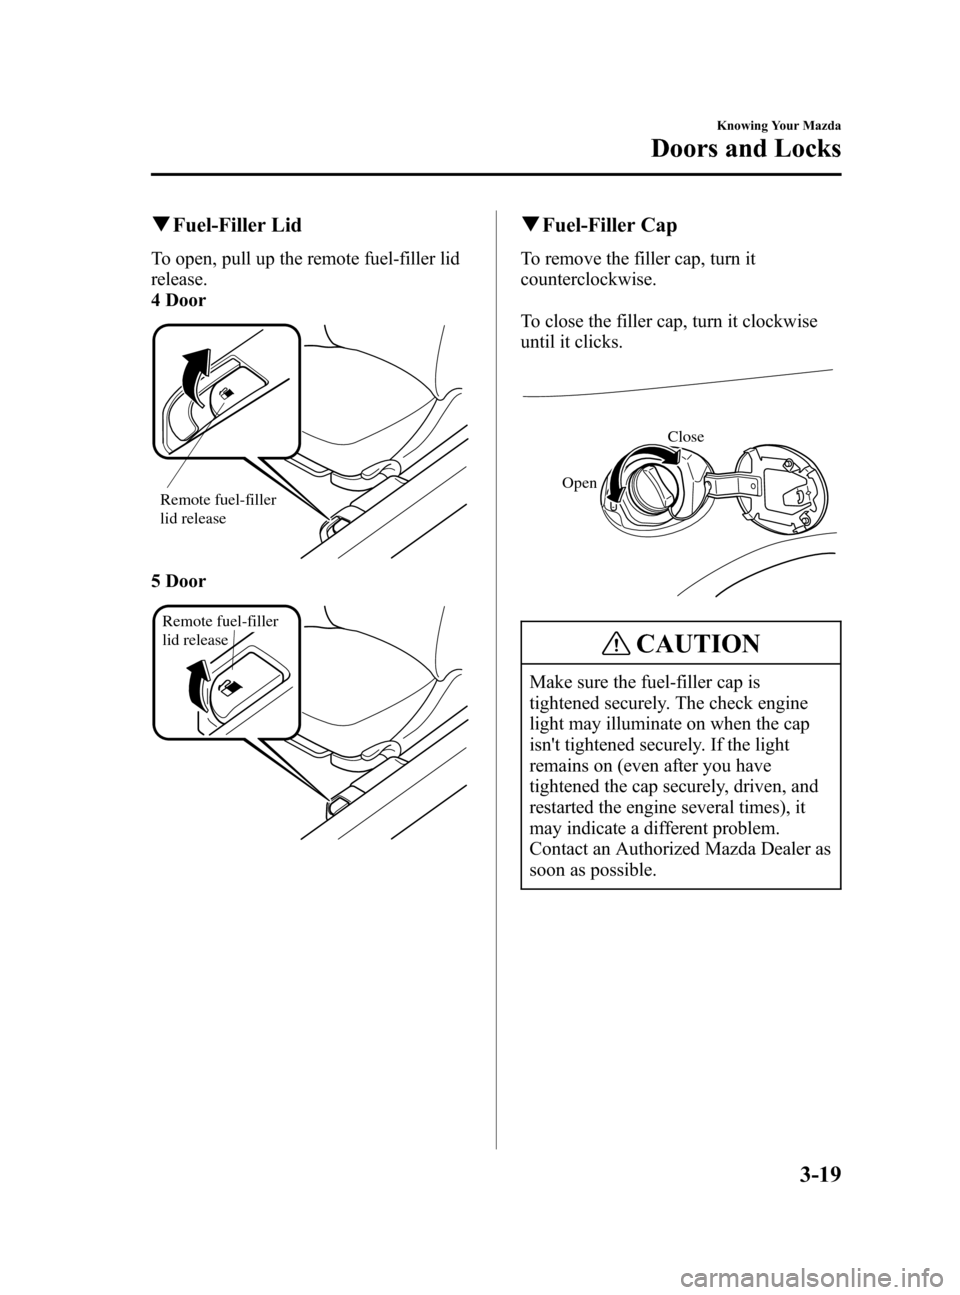 MAZDA MODEL 3 HATCHBACK 2005  Owners Manual (in English) Black plate (87,1)
qFuel-Filler Lid
To open, pull up the remote fuel-filler lid
release.
4 Door
Remote fuel-filler
lid release
5 Door
Remote fuel-filler
lid release
qFuel-Filler Cap
To remove the fill